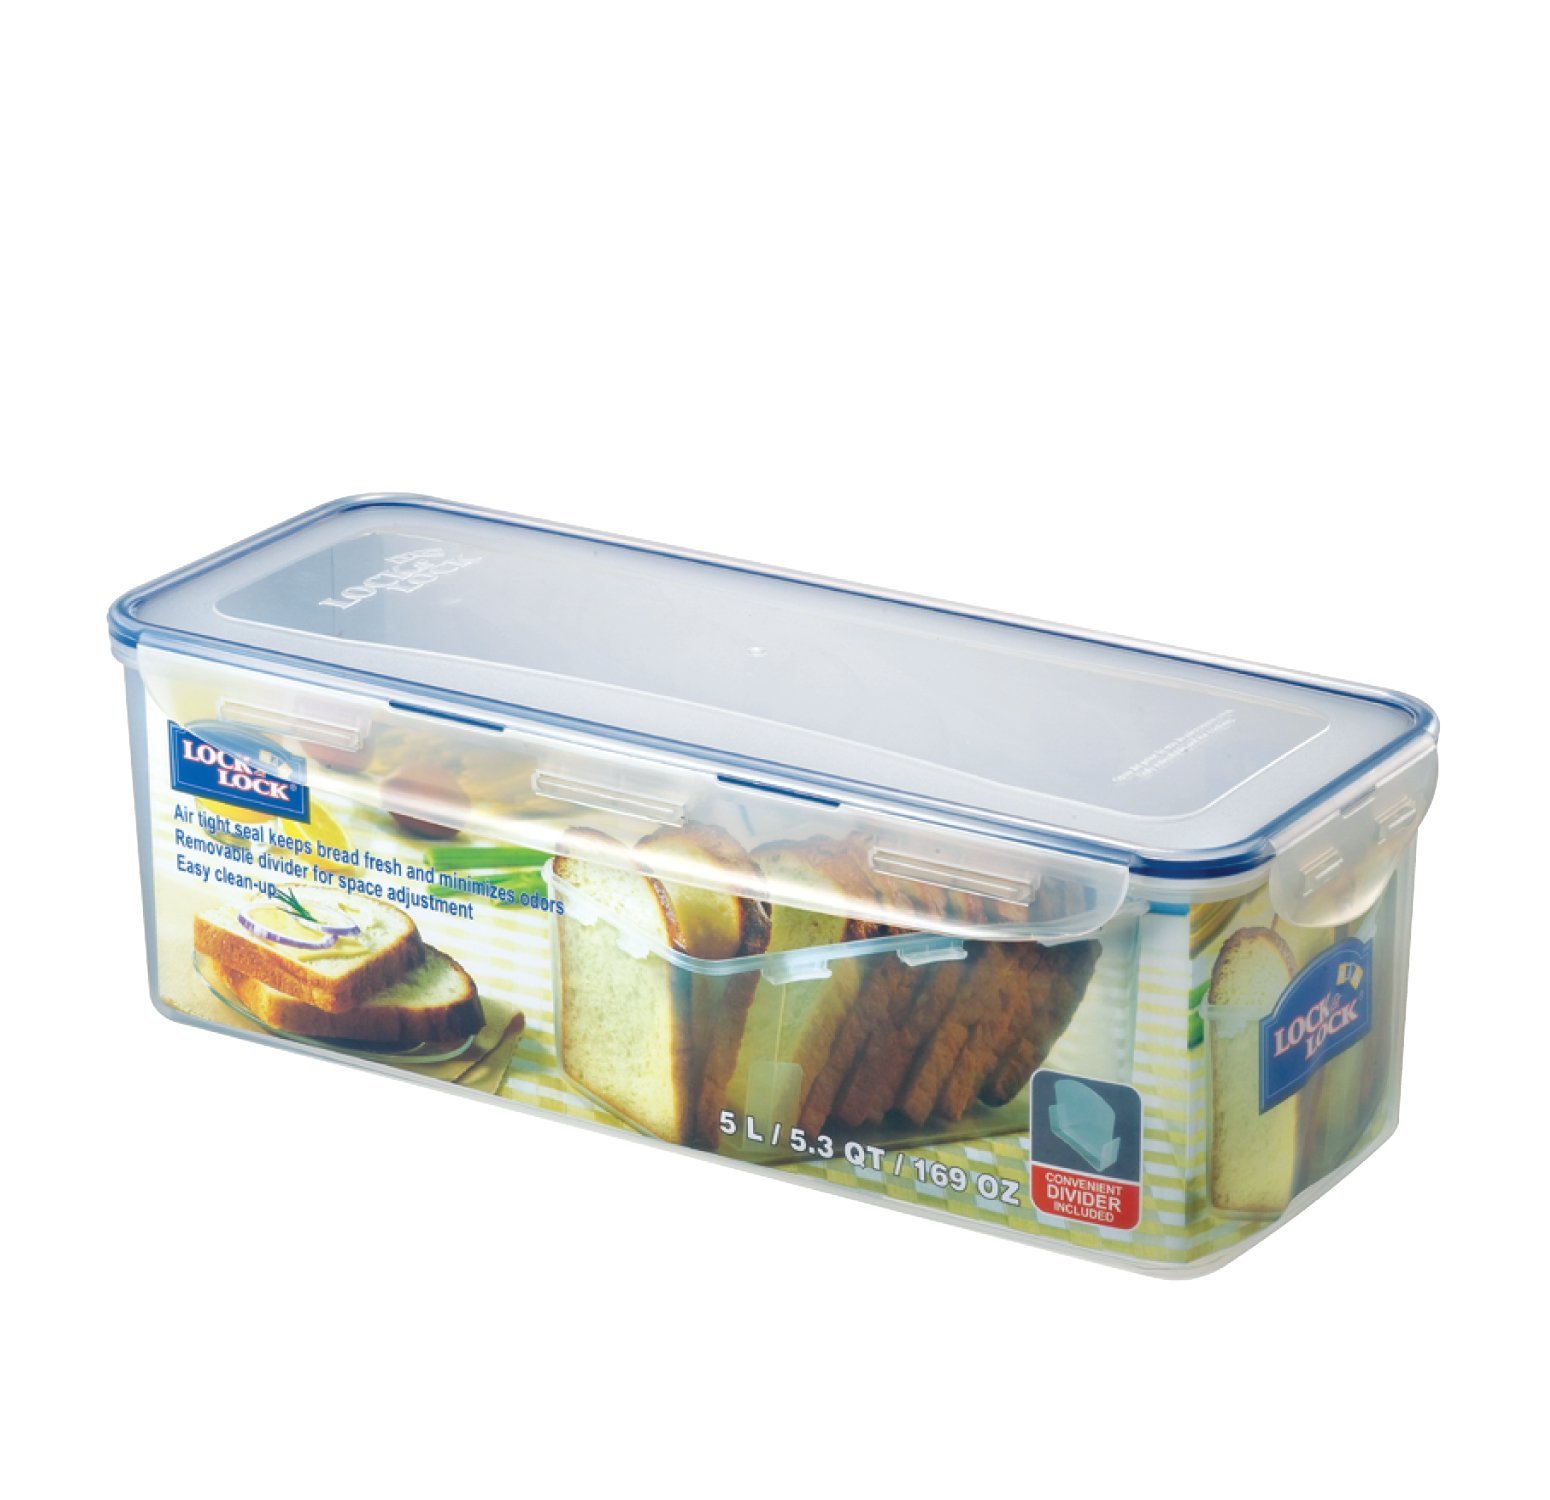 Lock & Lock Rectangular Bread Box, Tall, 21-Cup with Divider - $34.91